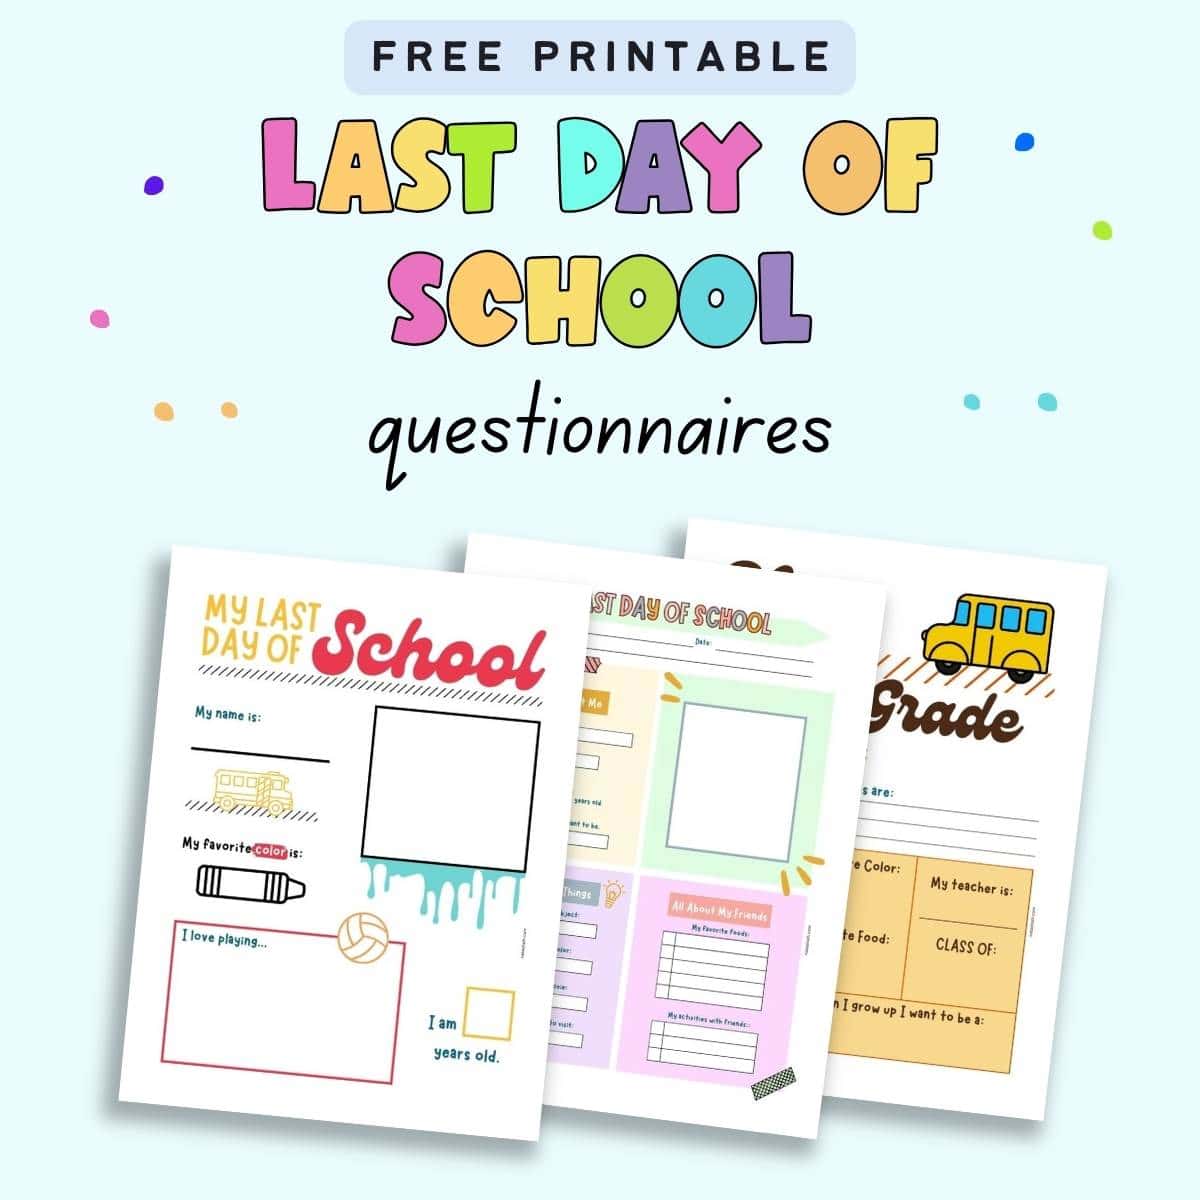 Text "Free printable last day of school questionnaires" with a preview of three different last day of school surveys for kindergarten and elementary students